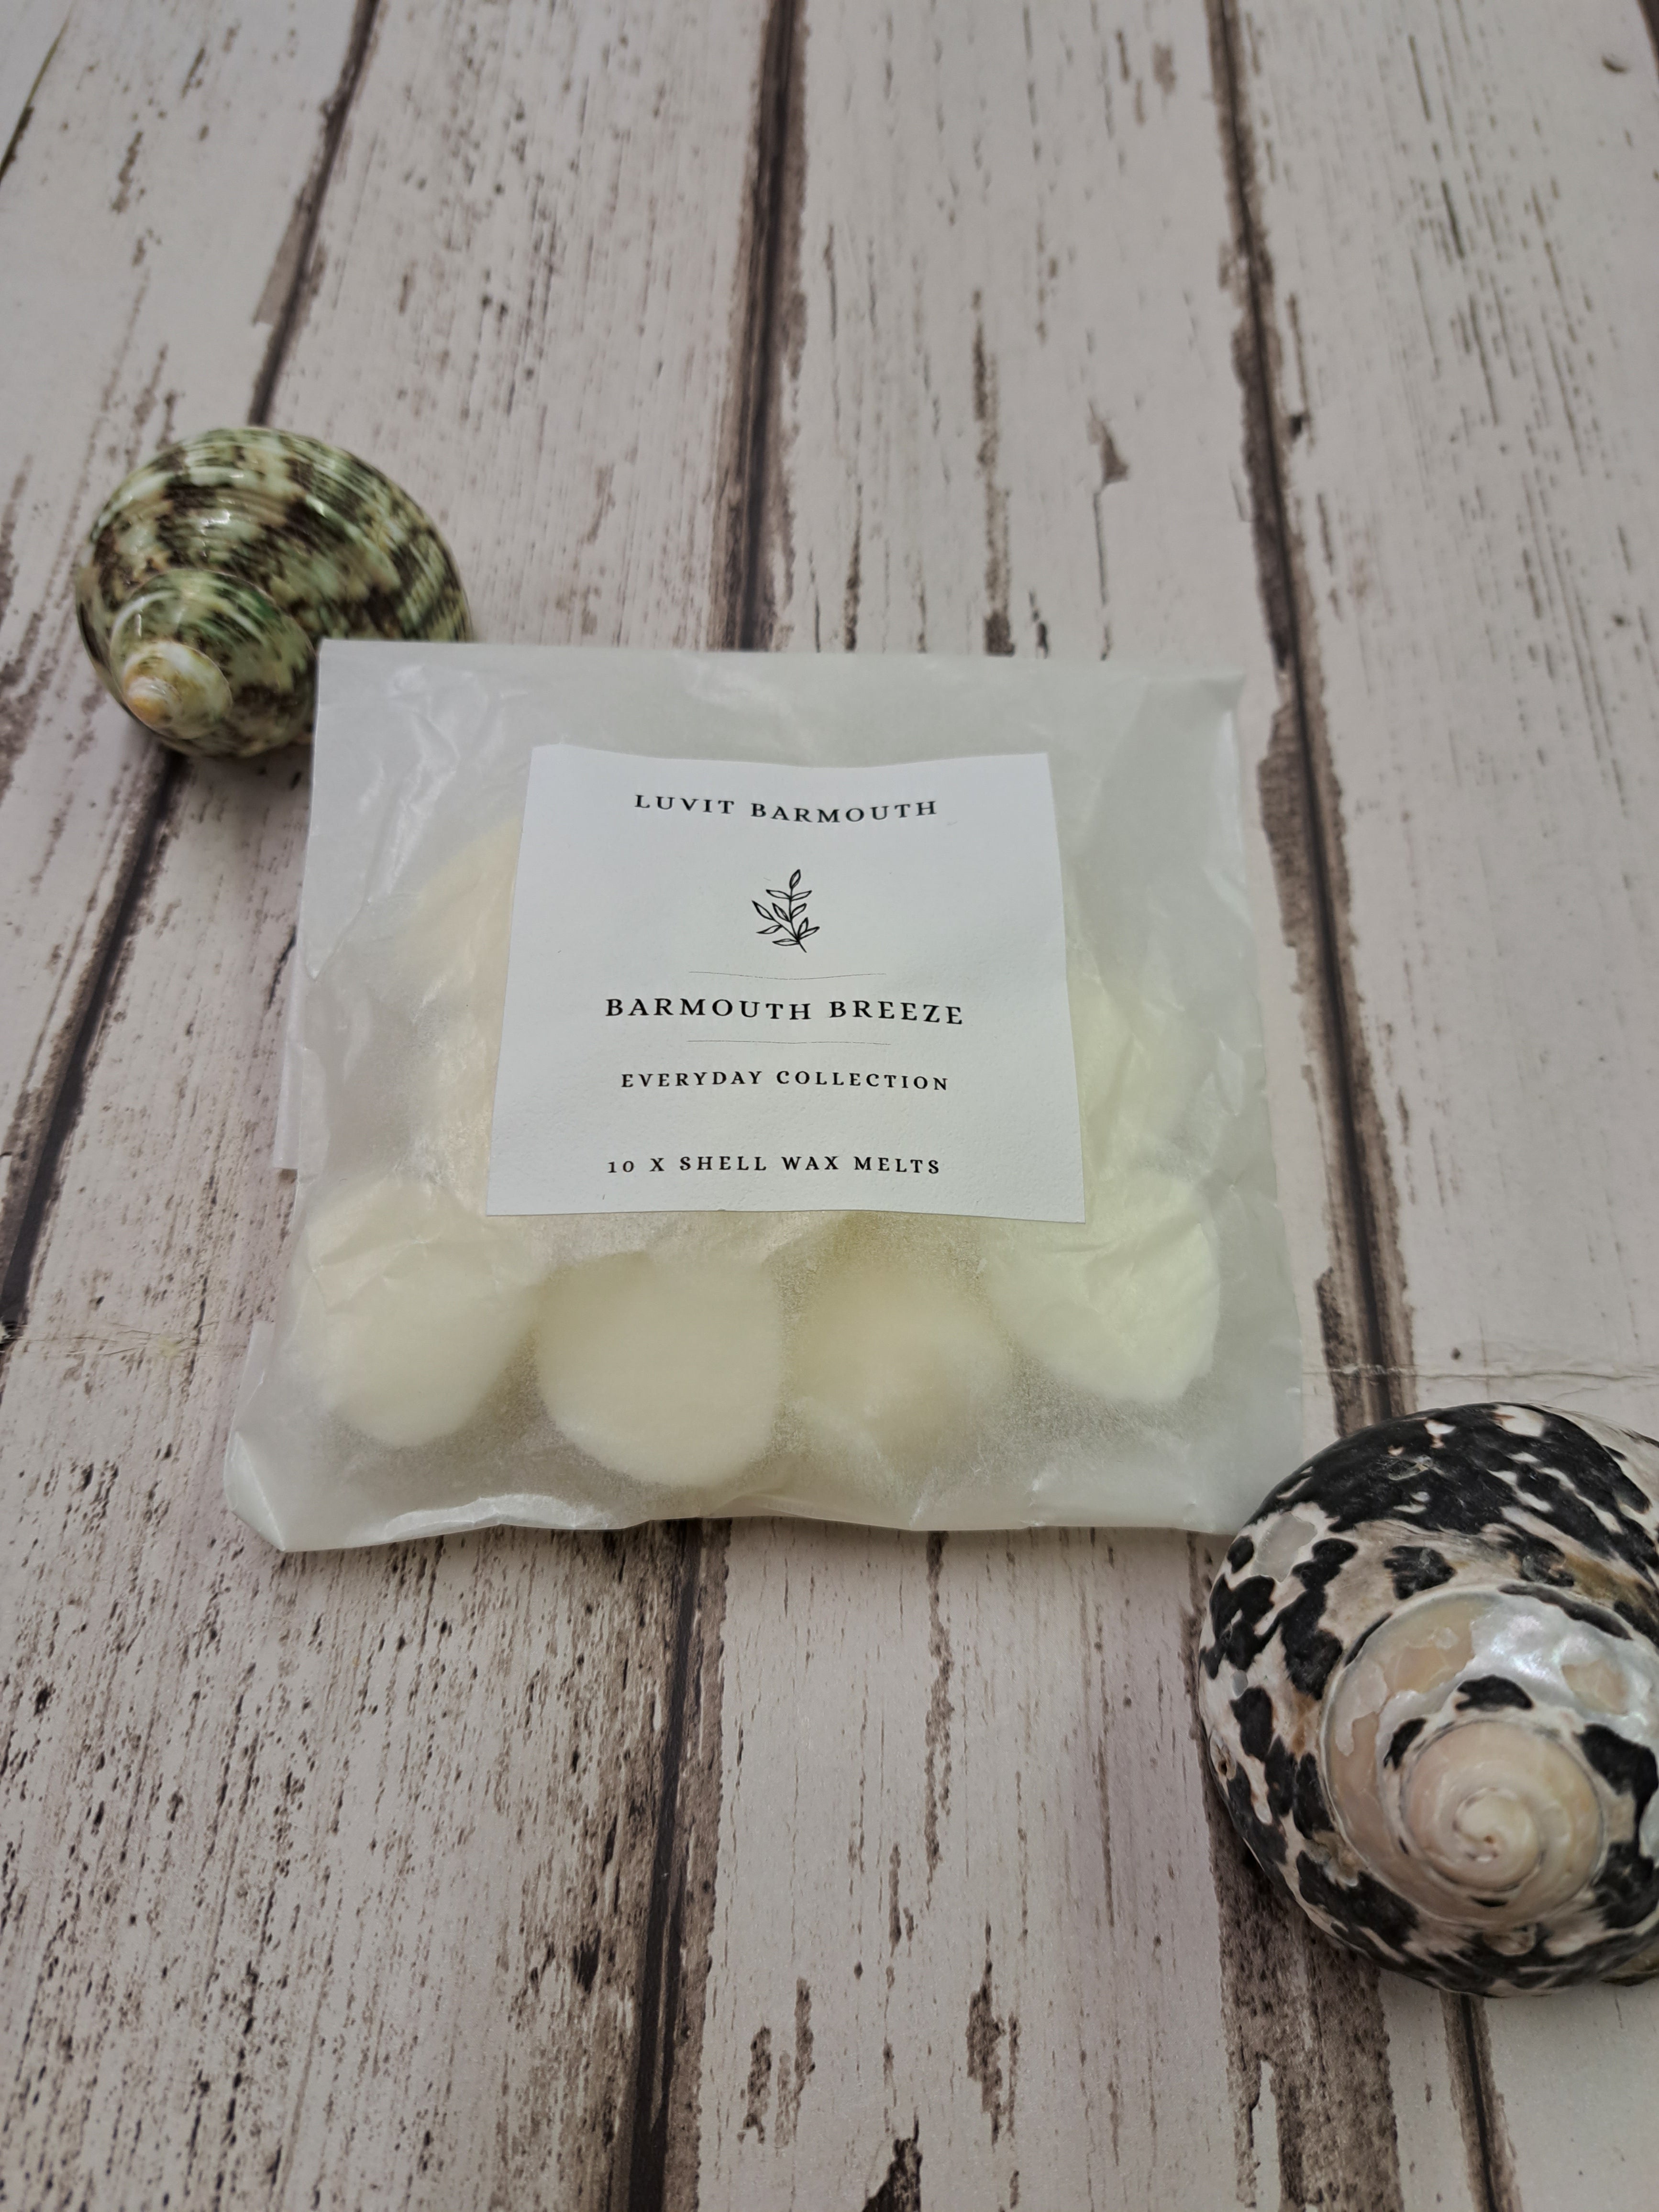 Handmade Wax melts. Barmouth breeze fragrance to fill your home/